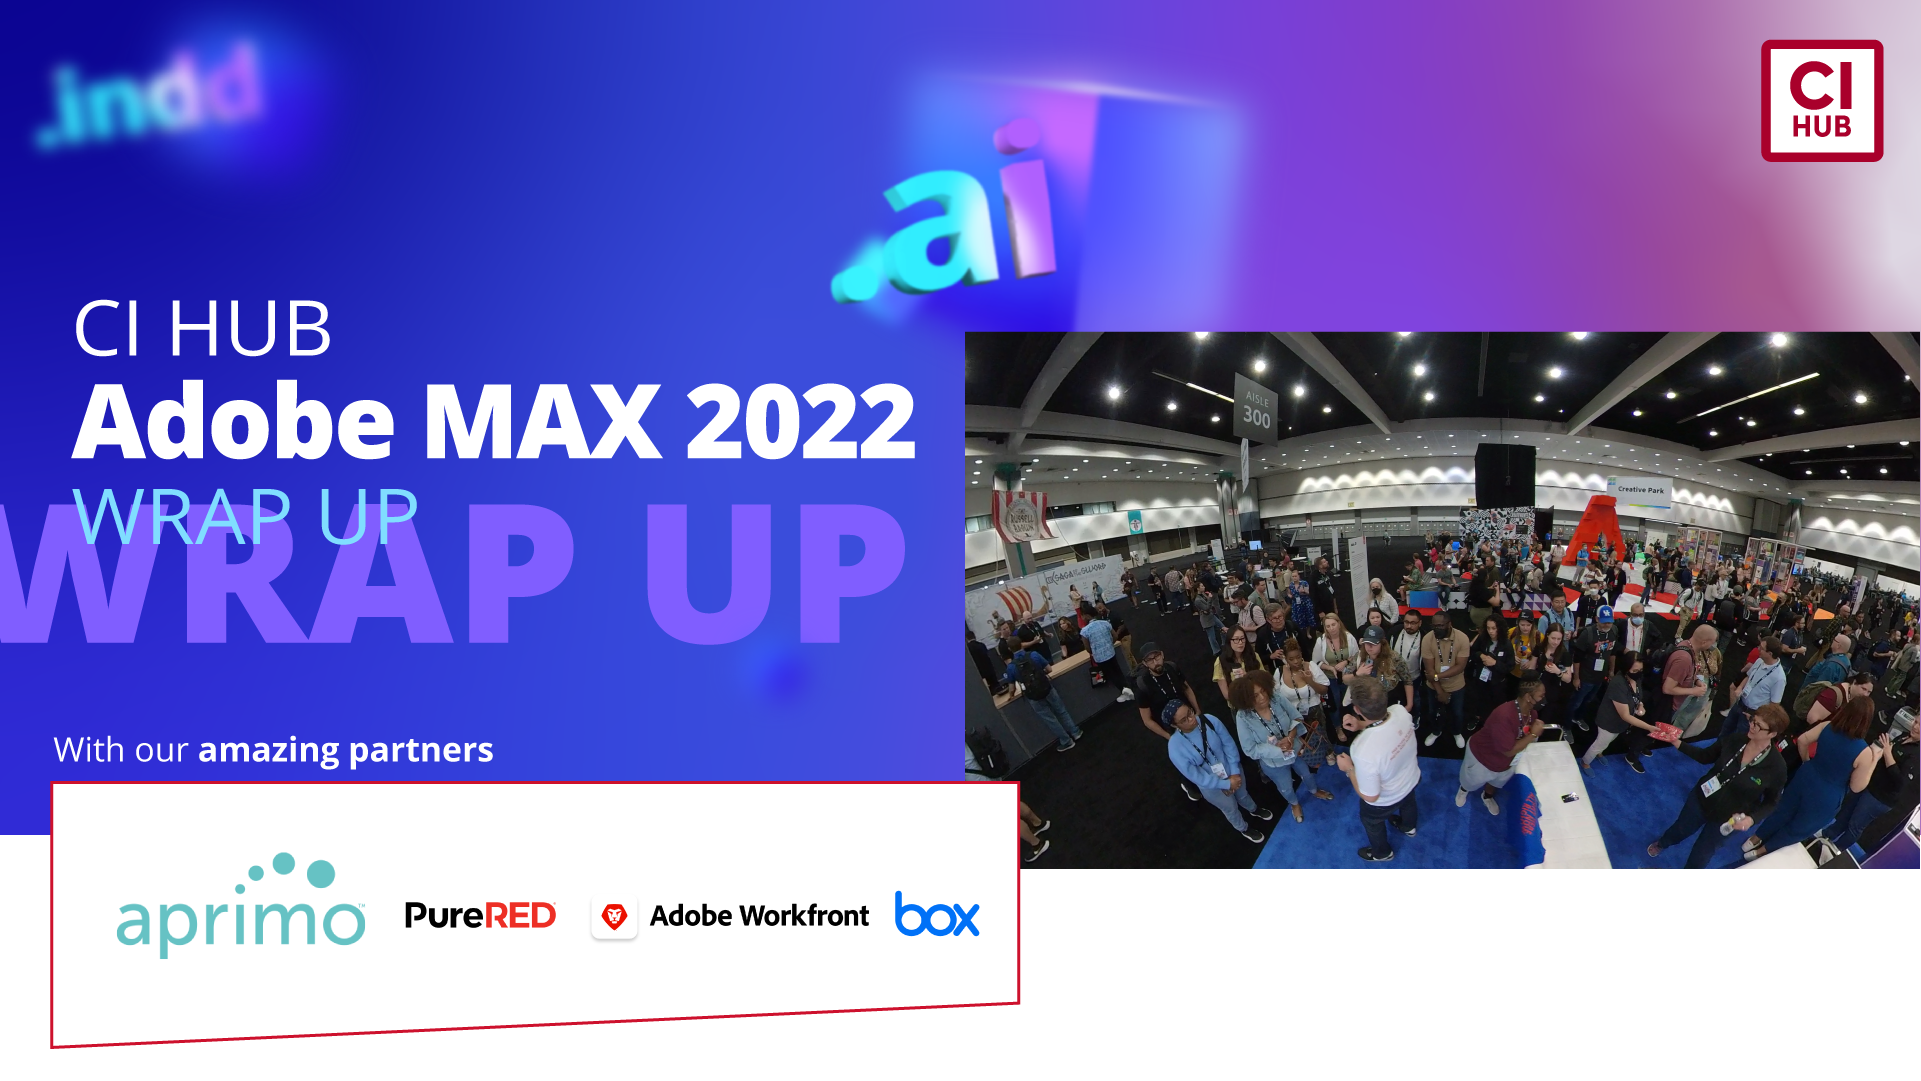 CI HUB is wrapping up the Adobe MAX 2022